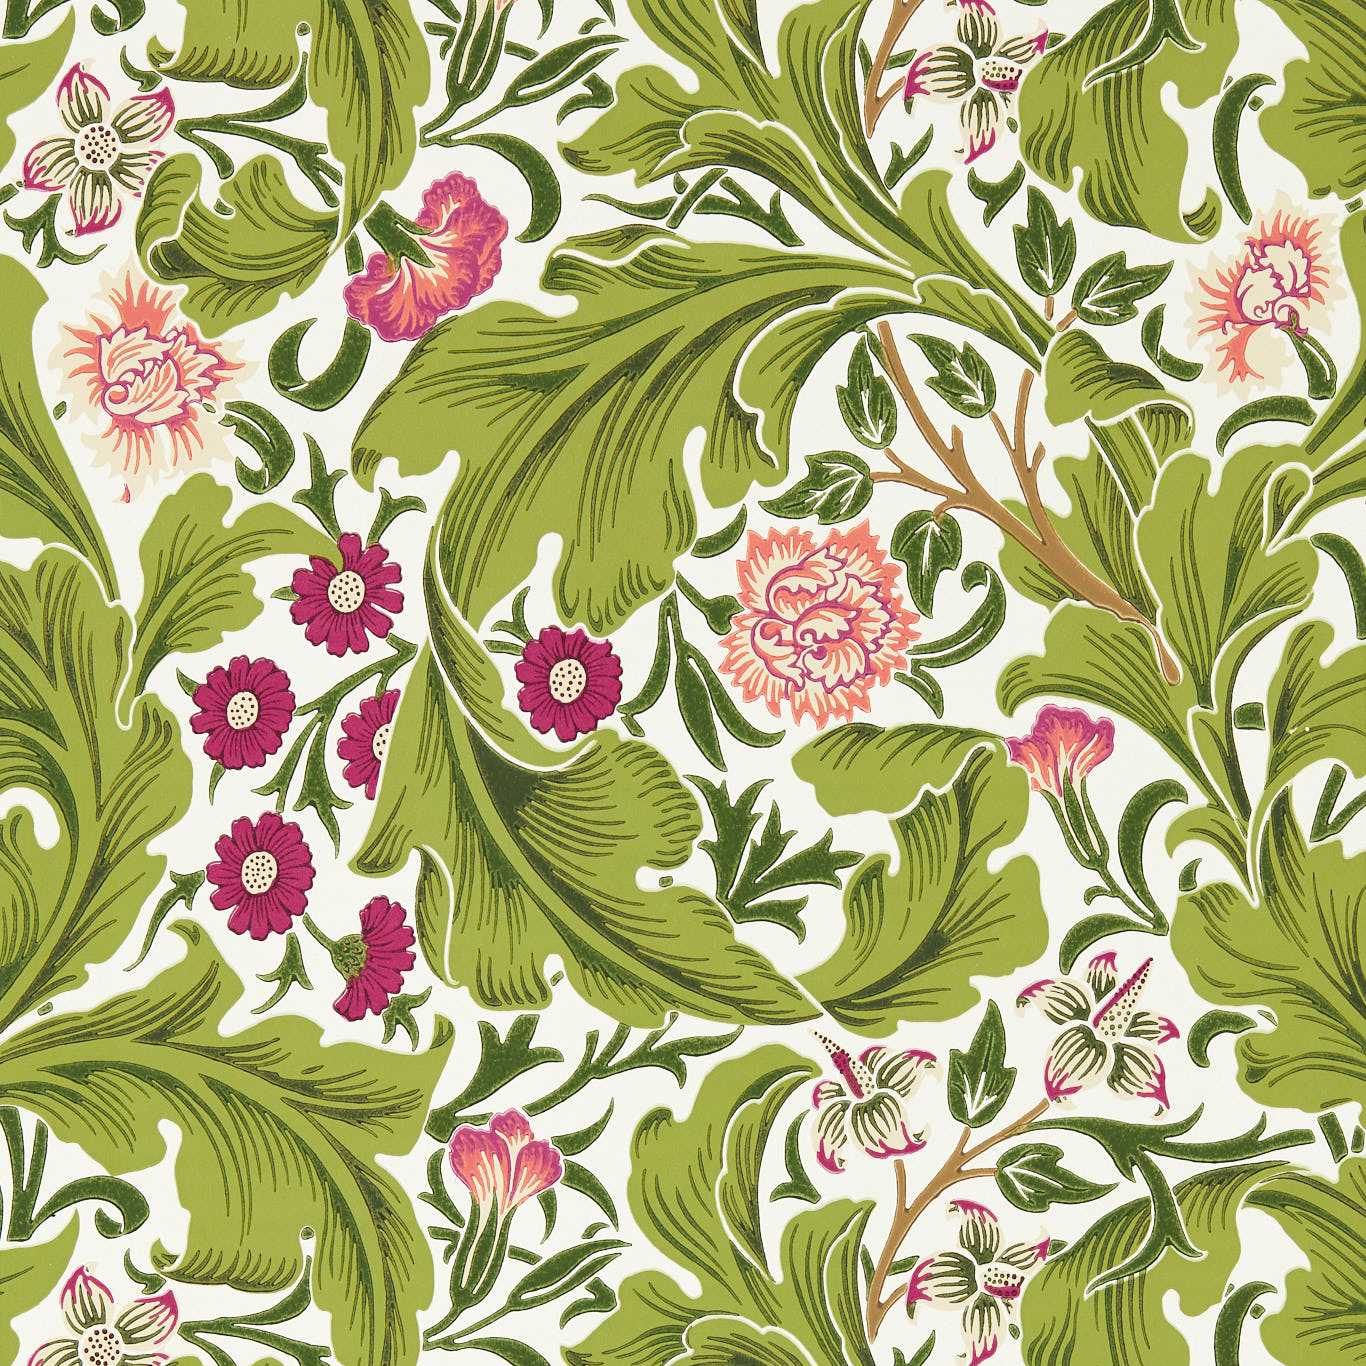 Leicester Sour Green/Plum Wallpaper MVOW217334 by Morris & Co